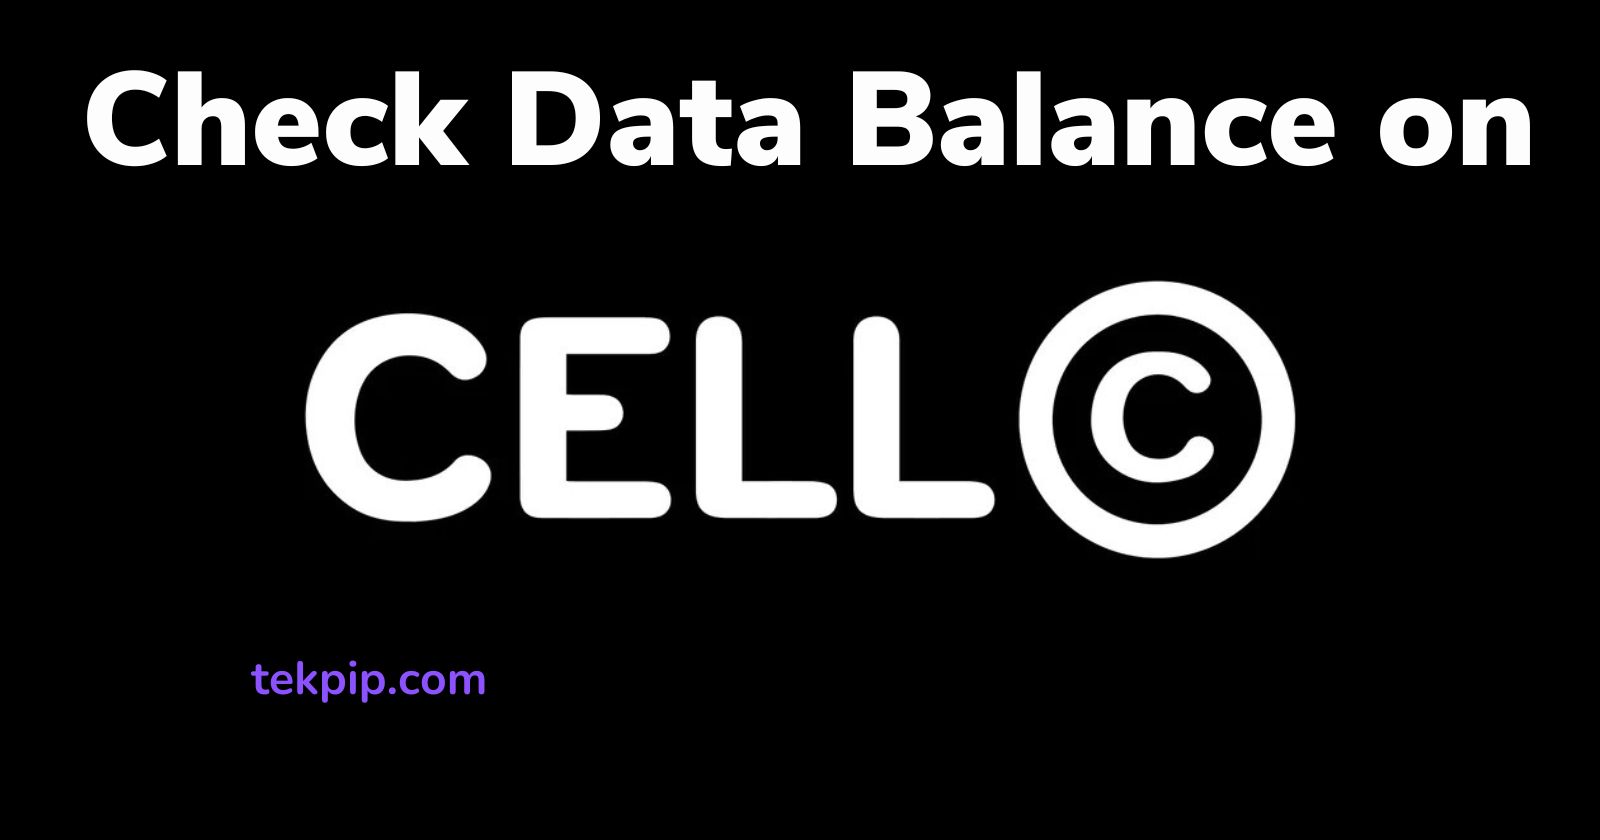 how to check data balance on cell c